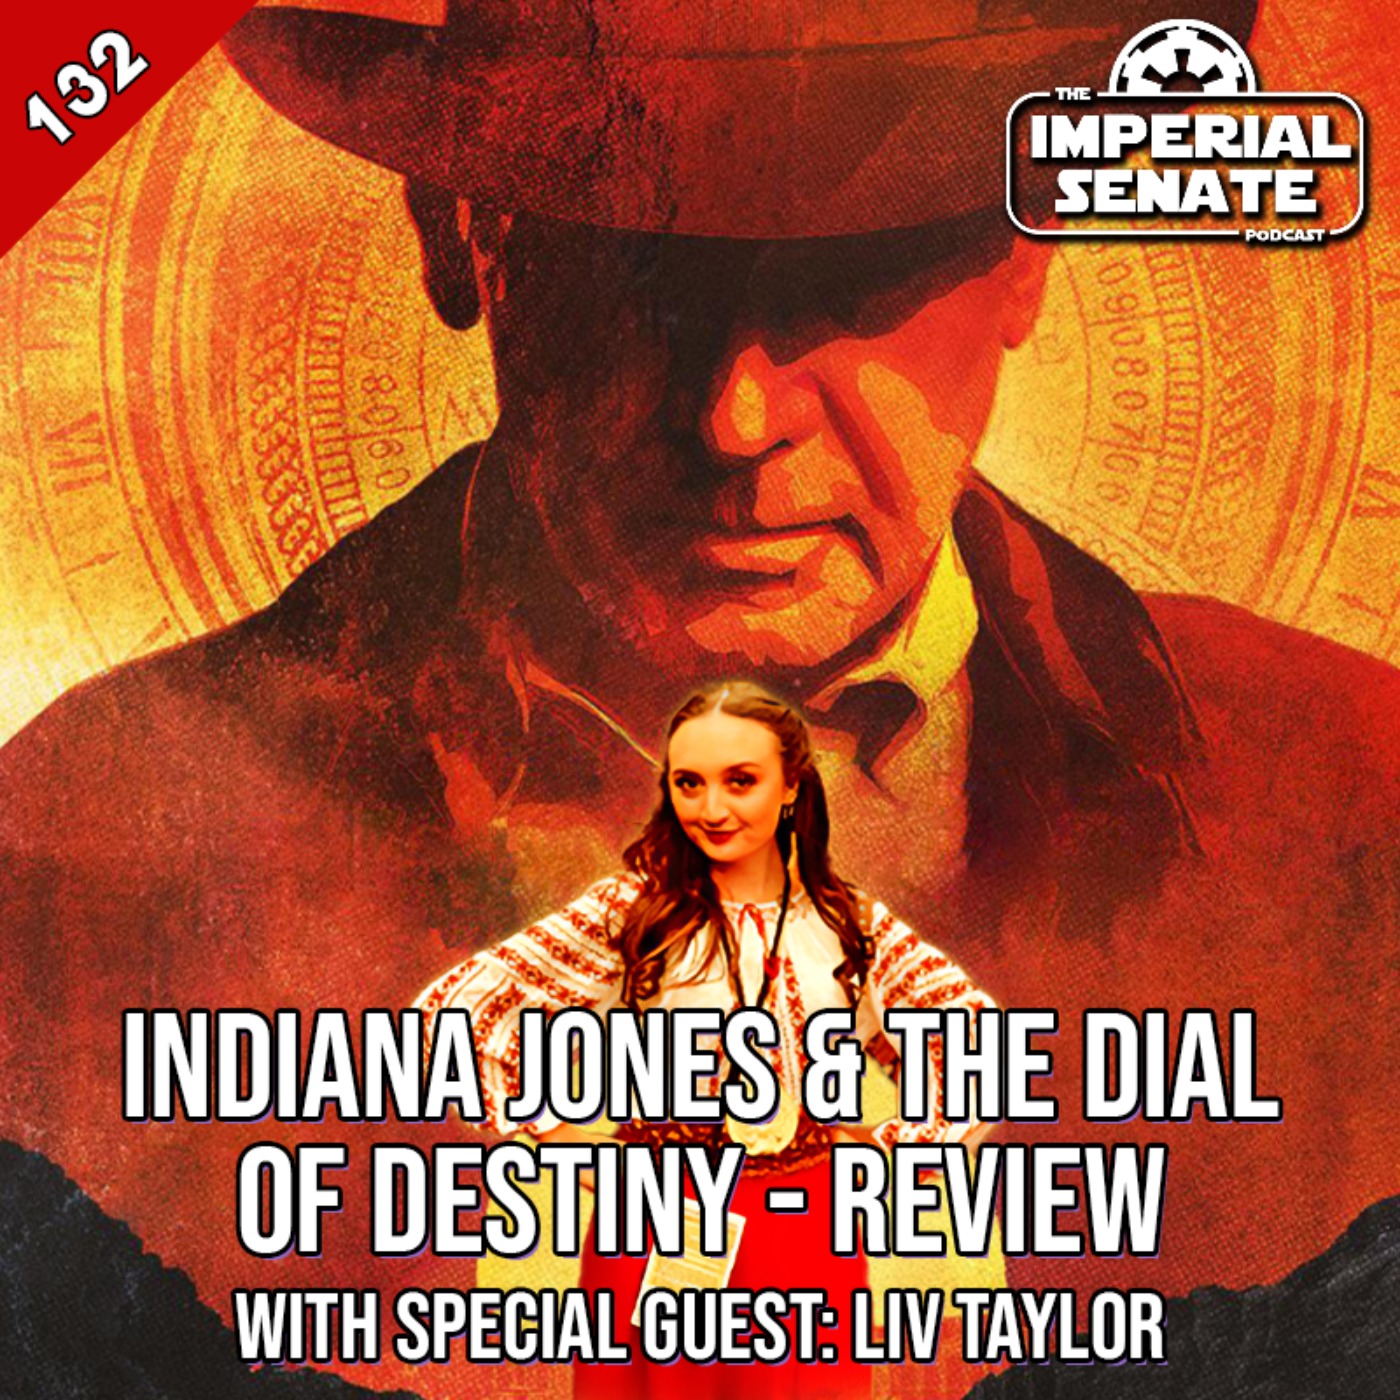 The Imperial Senate Podcast: Episode 132 - Indiana Jones & The Dial of Destiny Review (With Special Guest: LivinLikeLeia)